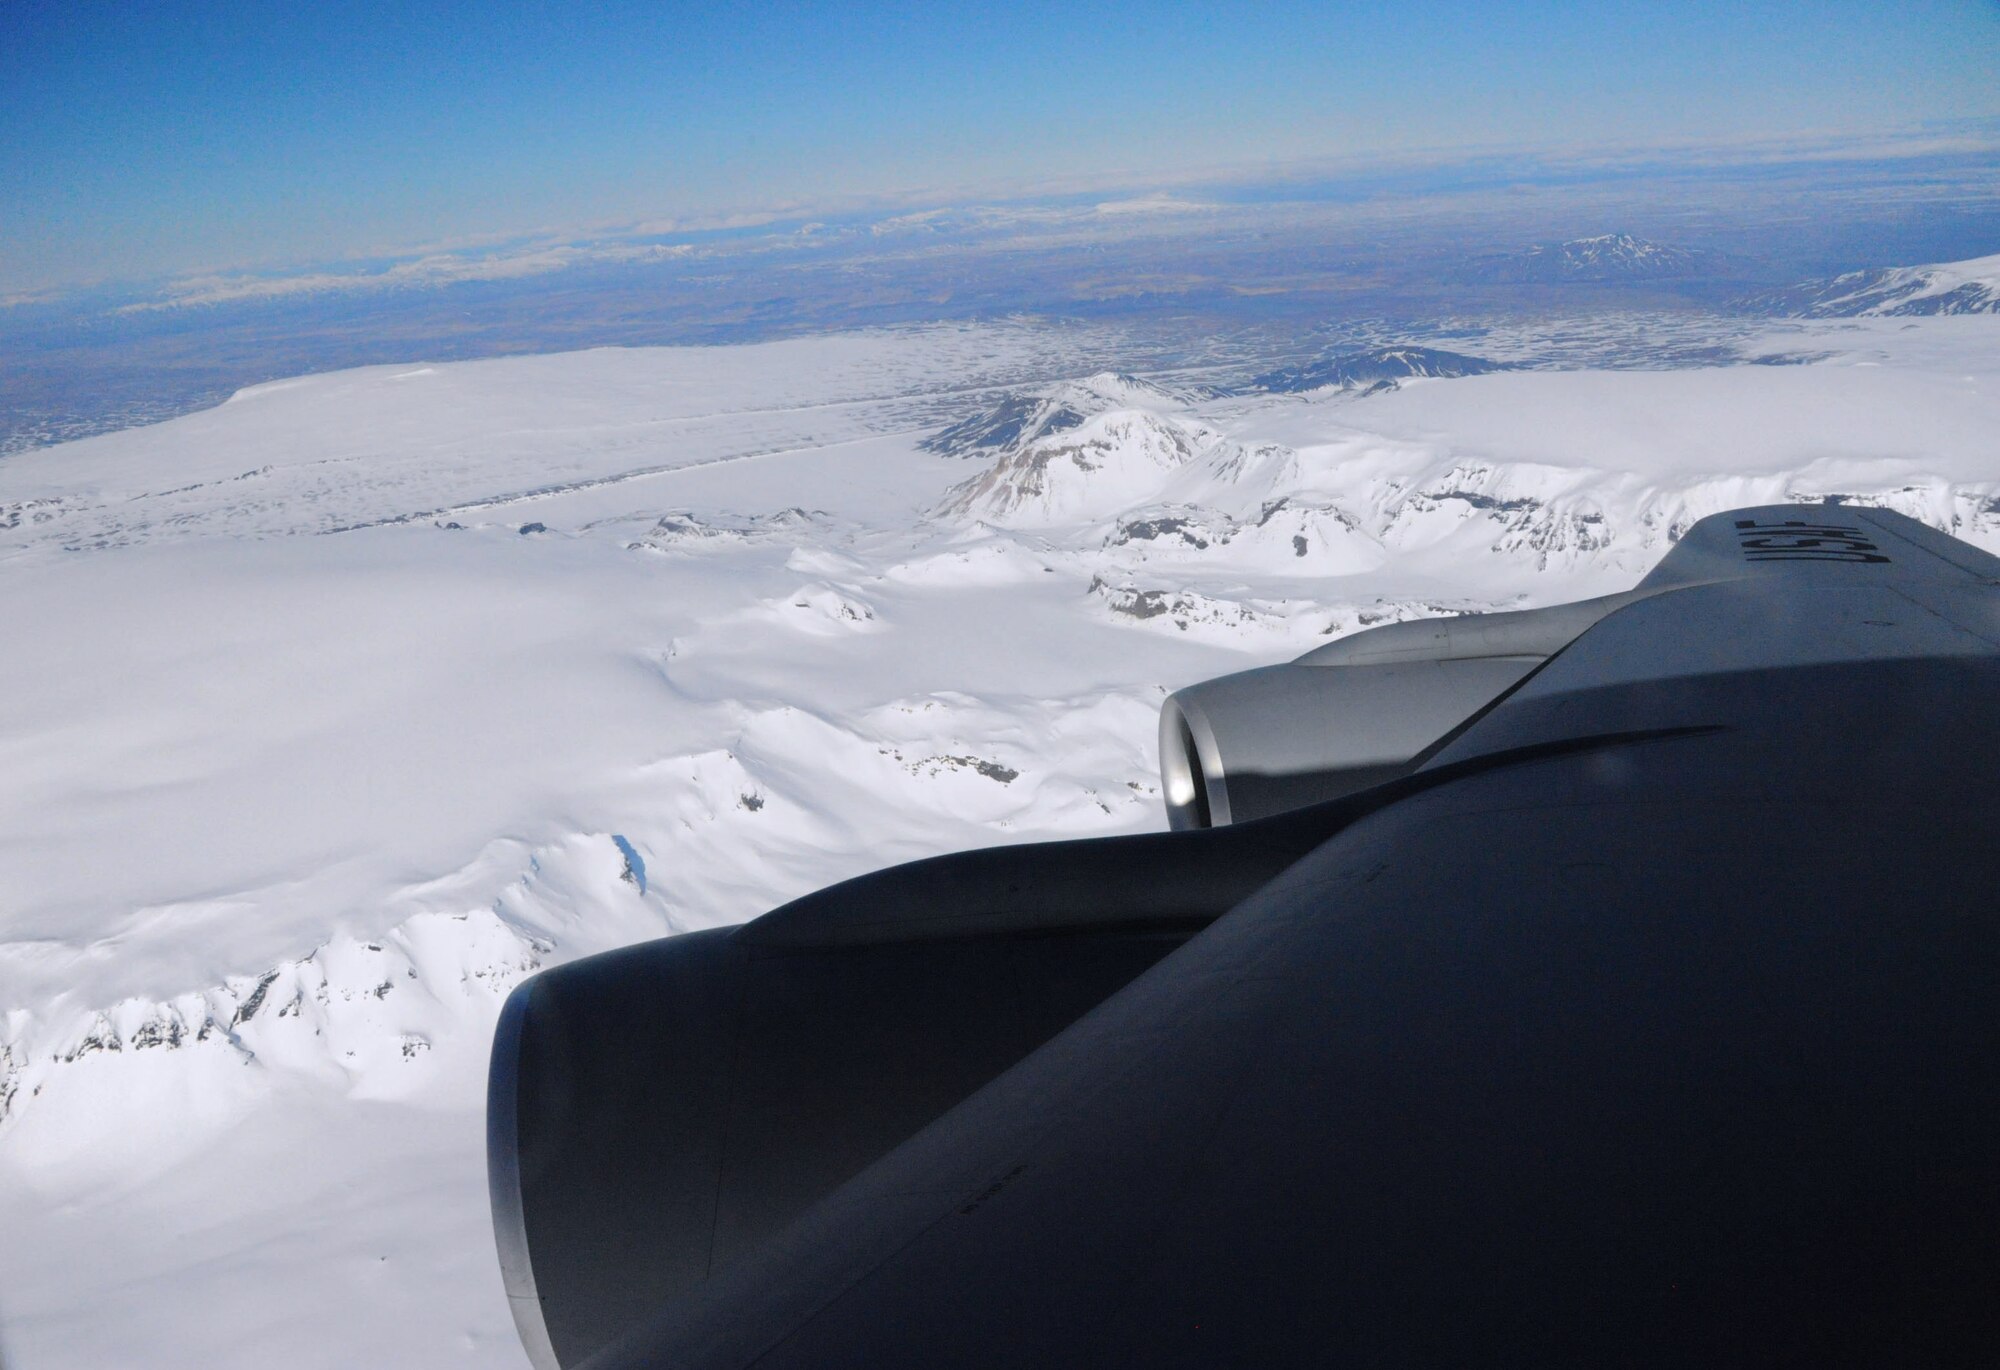 A U.S. Air Force KC-135 Stratotanker assigned to the 916th Air Refueling Wing, Air Force Reserve Command, Seymour Johnson, N.C., flies over the snow-capped glaciers of Iceland while conducting refueling efforts during Icelandic Air Surveillance operations, April 9, 2016. The U.S. Air Force’s forward presence in Europe allows the U.S. to work with allies to ensure regional security in the region. (U.S. Air Force photo by Master Sgt. Kevin Nichols/Released)